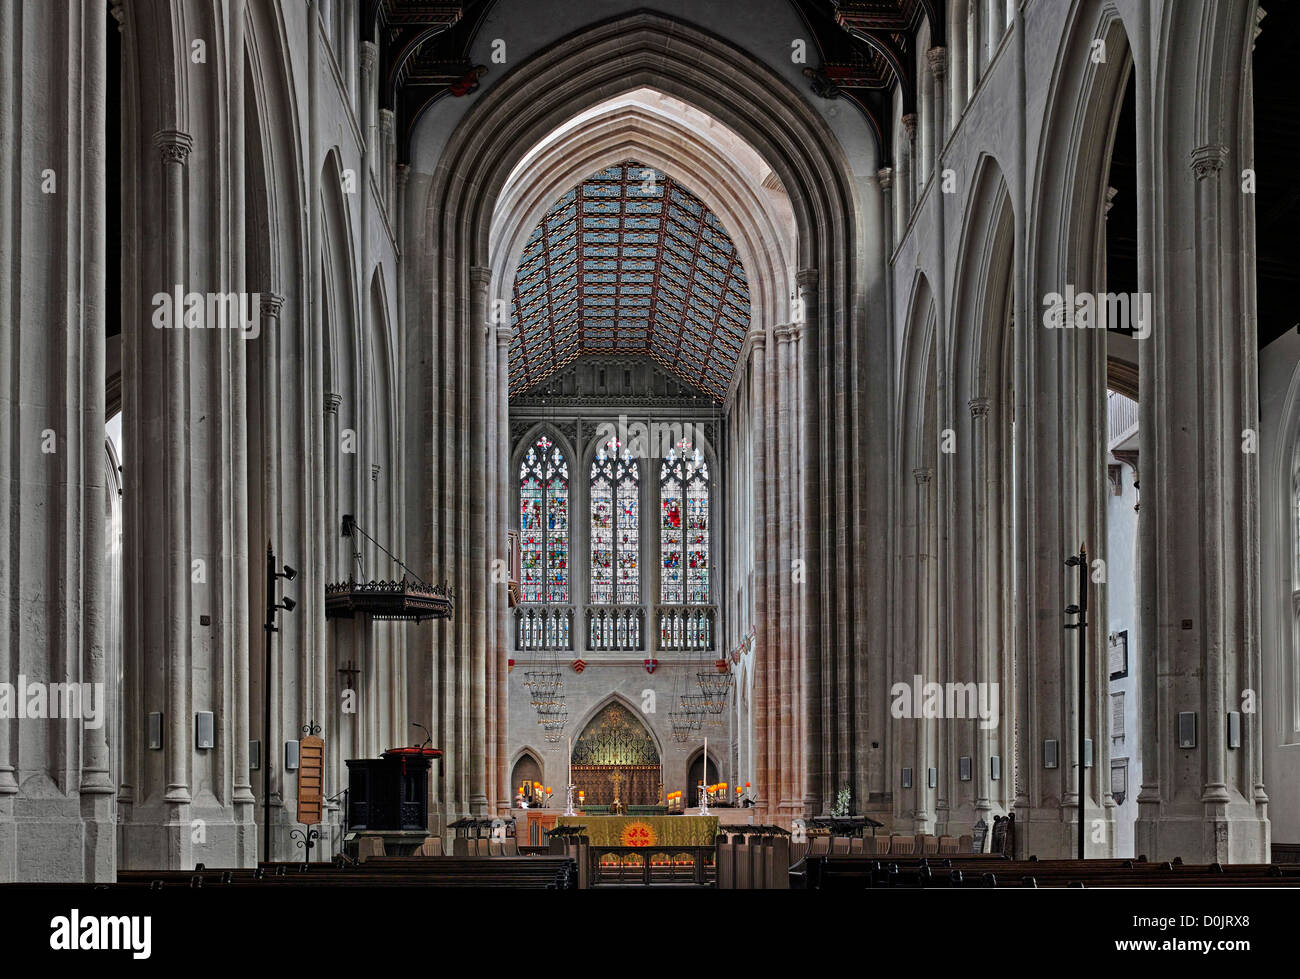 St Edmundsbury Cathedral interior looking towards the altar. Stock Photo